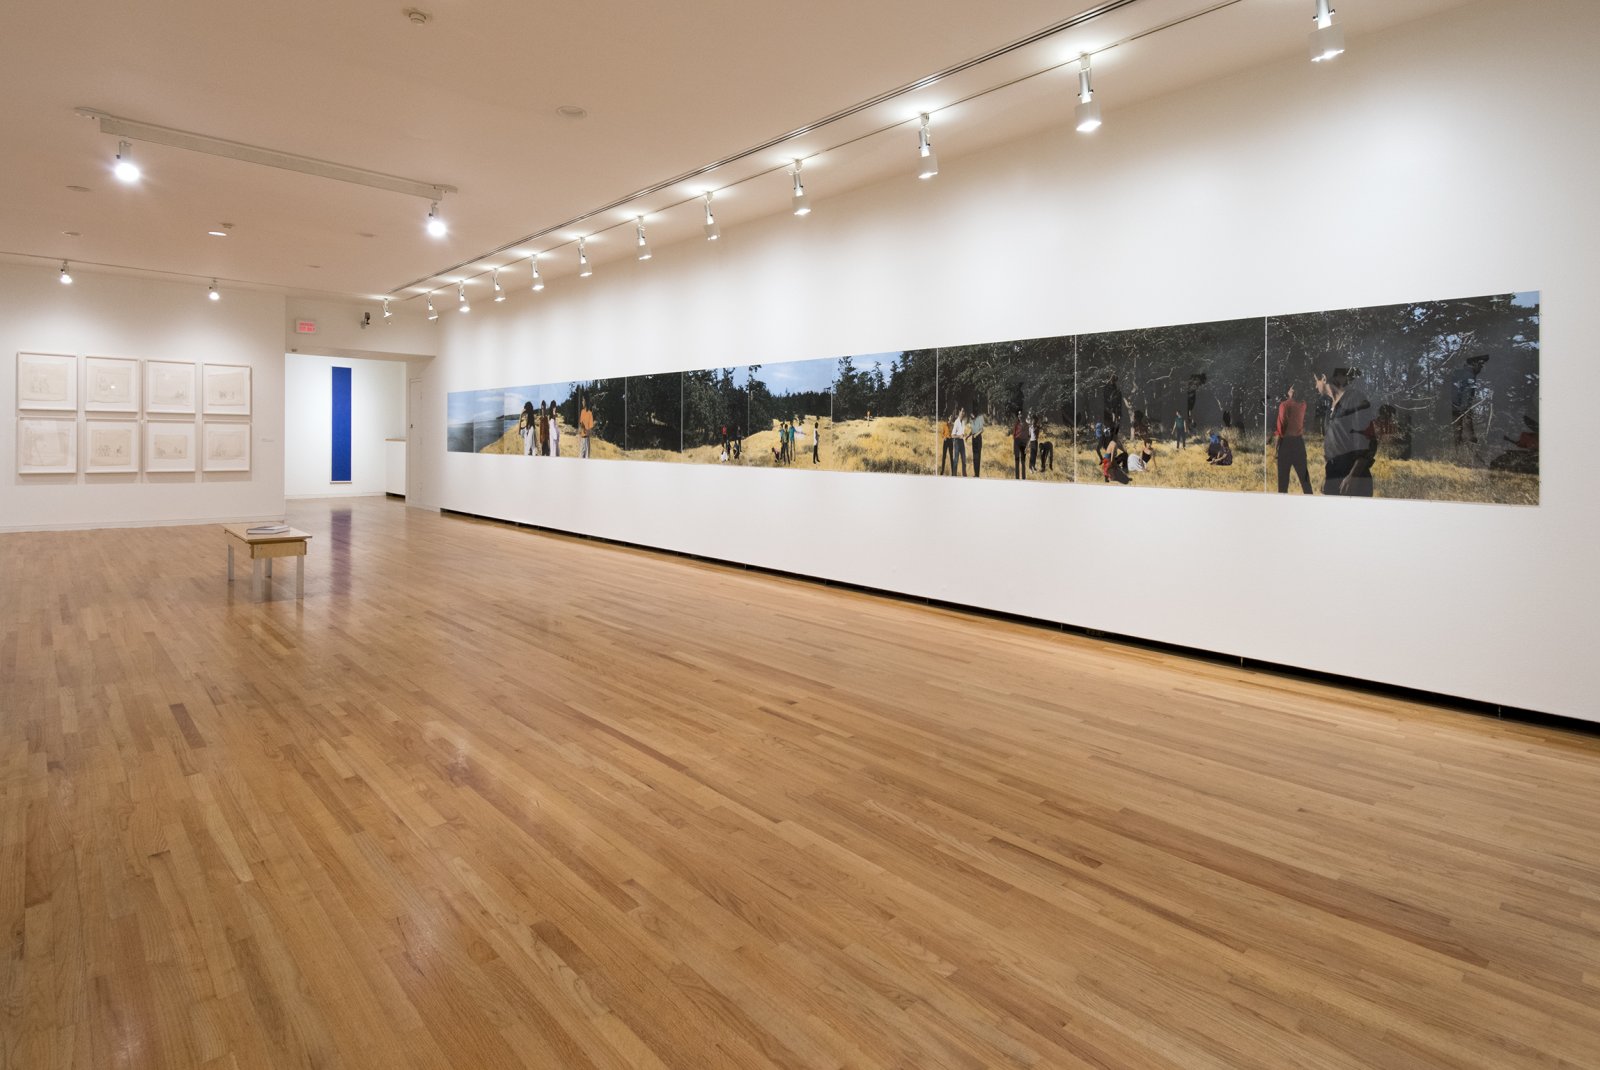 A series of thirteen photographs joined together to form a long panoramic view of a clifftop with people and trees; it takes up an entire gallery wall.